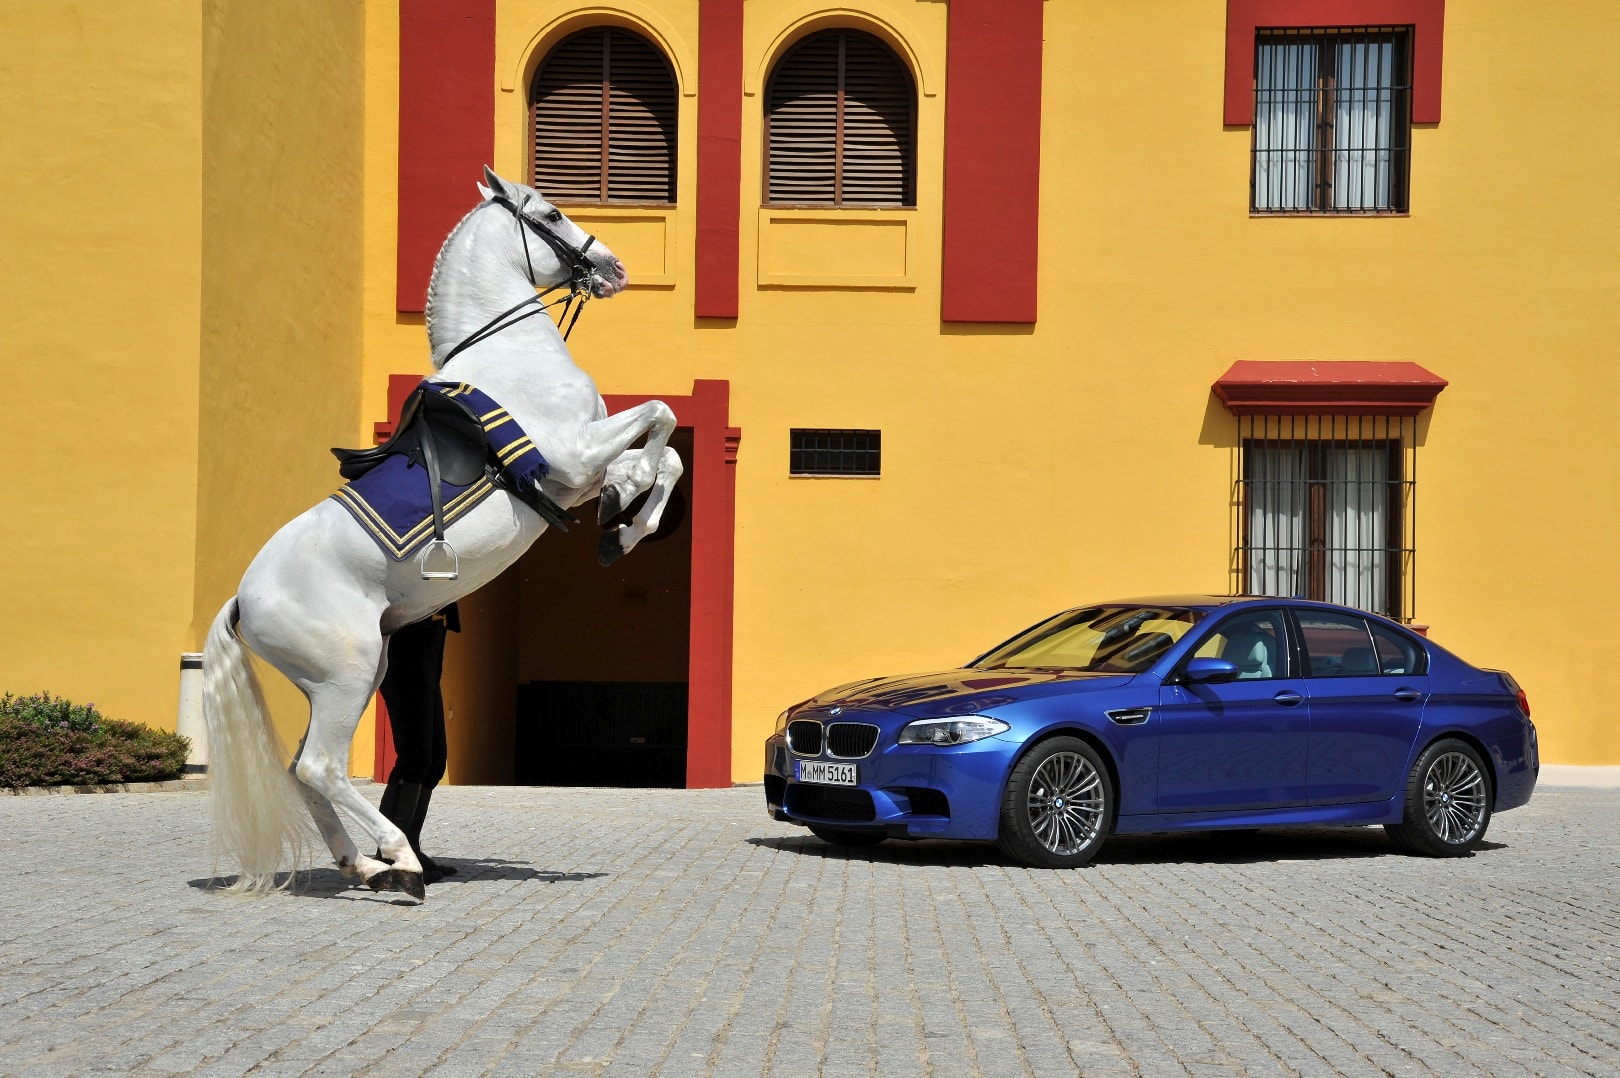 BMW used Louis Vuitton to sell more cars. here's how…, by Menan Sub